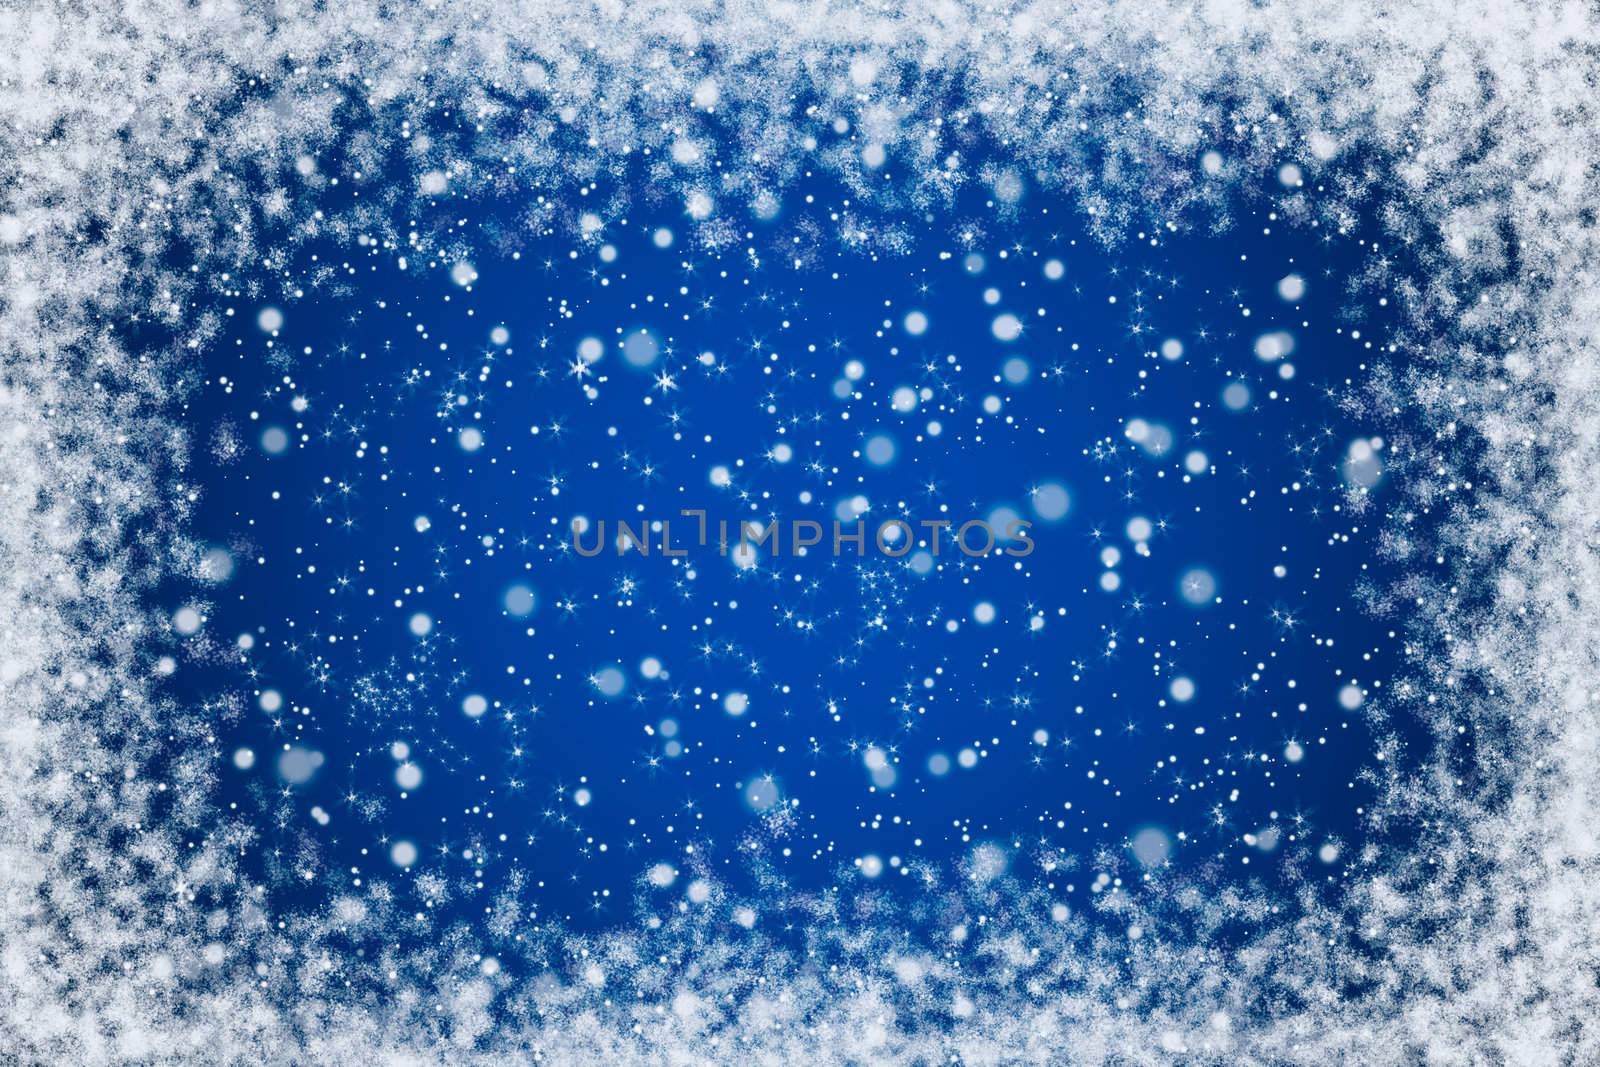 Pretty Blue Night Sky with Stars and Snow Background by scheriton